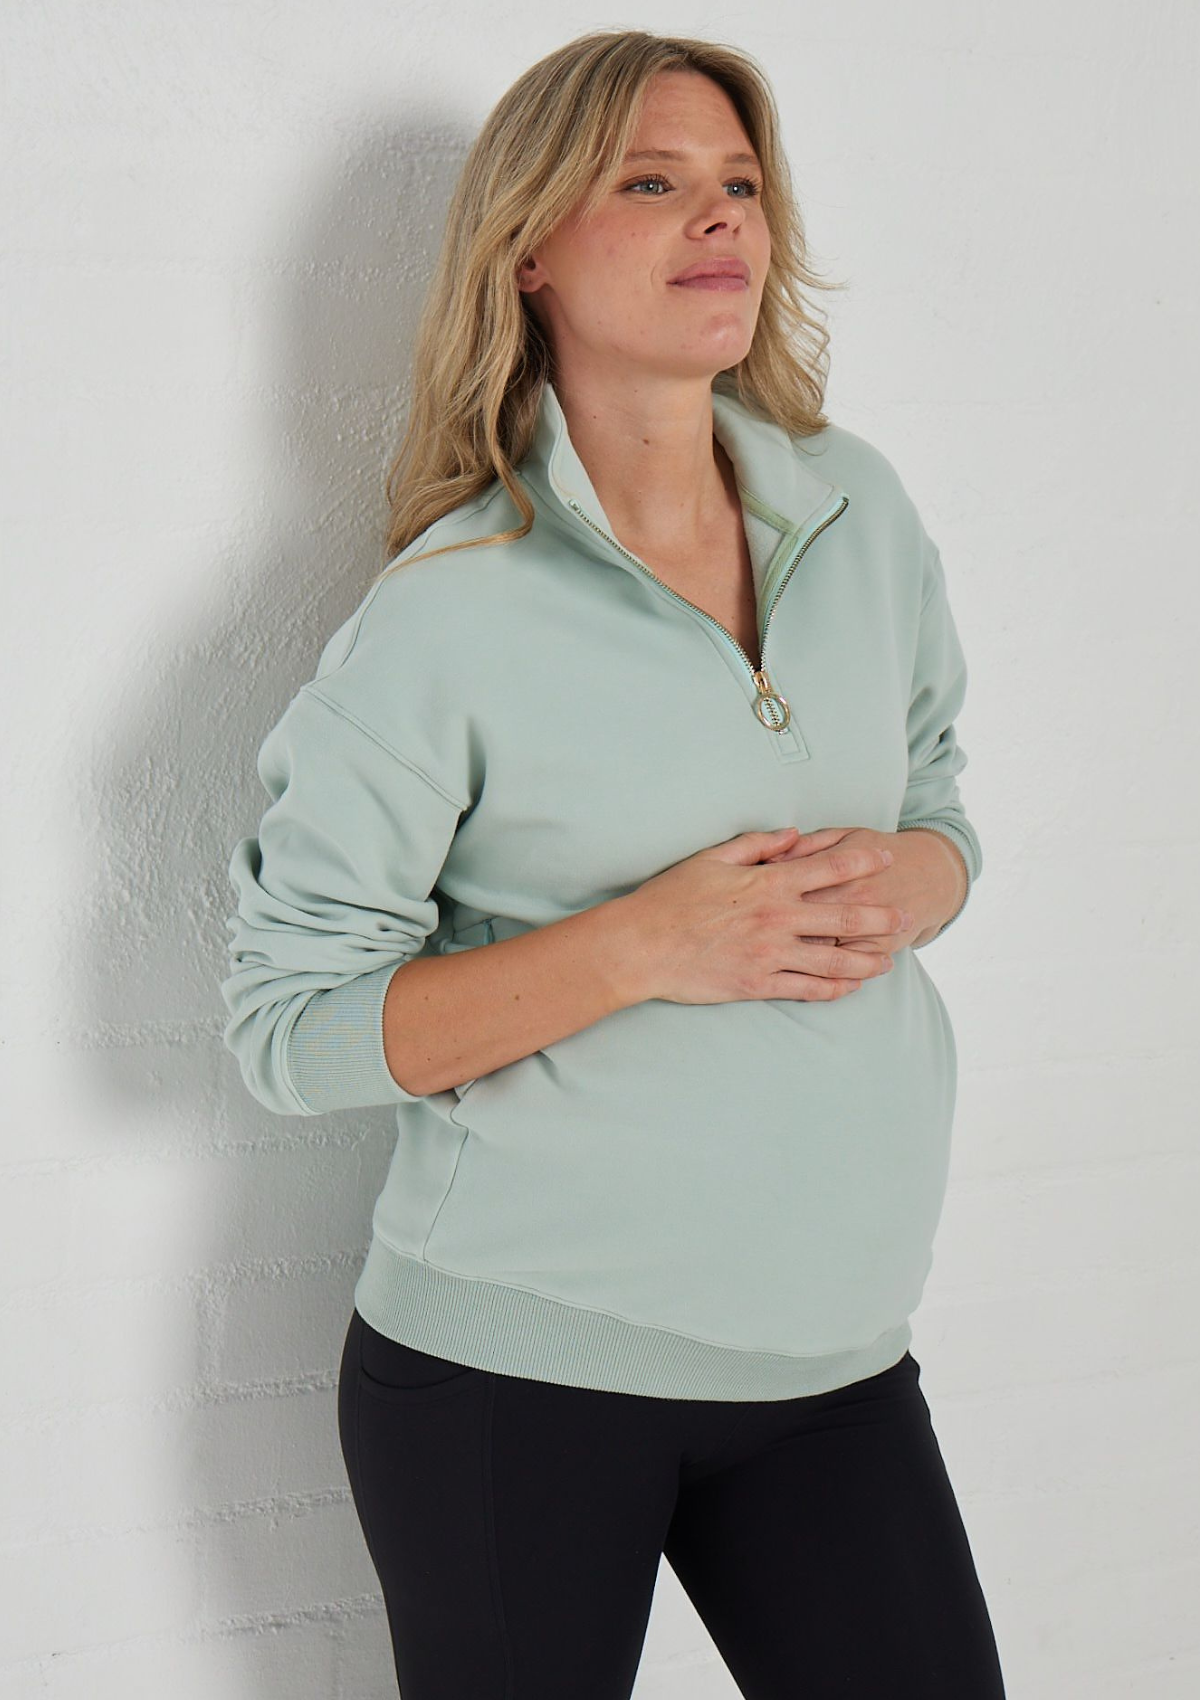 All Phases Fleece Sweater Sizing Guide - Women's Maternity Sweater –  Wildelore